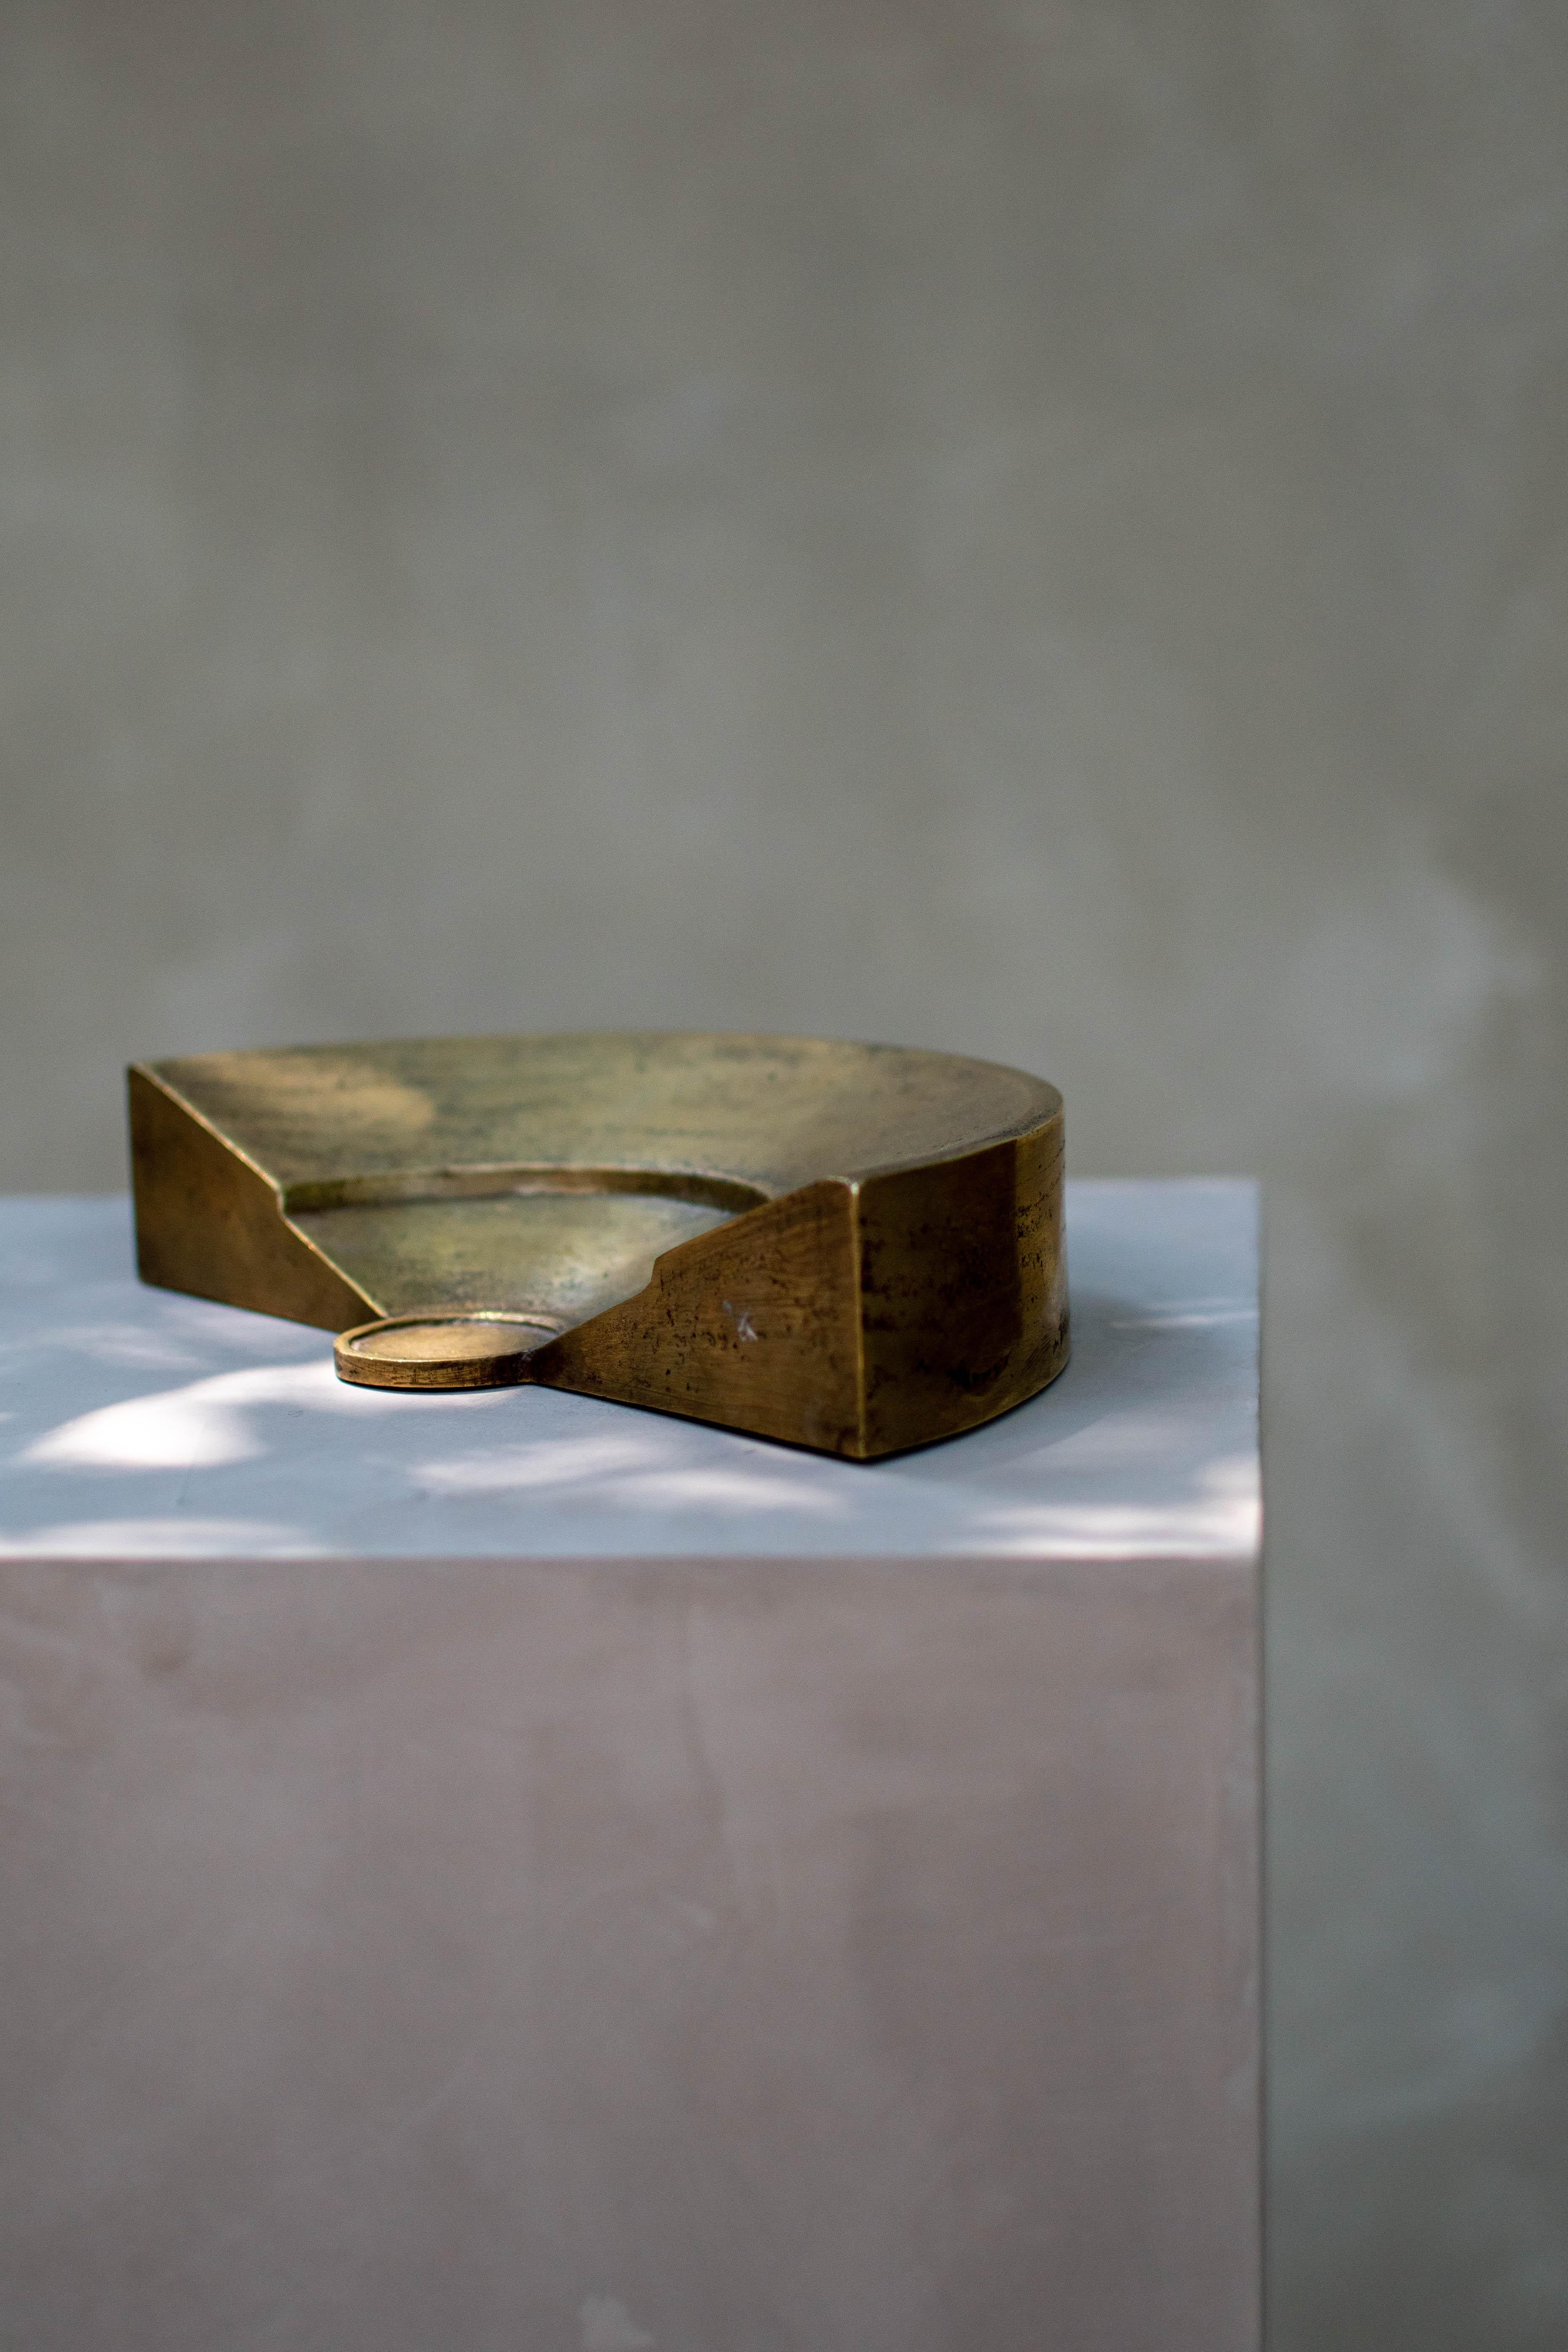 Cenote Object Half by C. Nuñez Hand Patinated Casted Bronze
13.5W x 5.5H cm
10.8D x 5.3W x 2.1H in
CURRENTLY IN STOCK 

Formally inspired in the pre-Hispanic ballgame
courts, cenote represents, with its pure materiality, the ancient